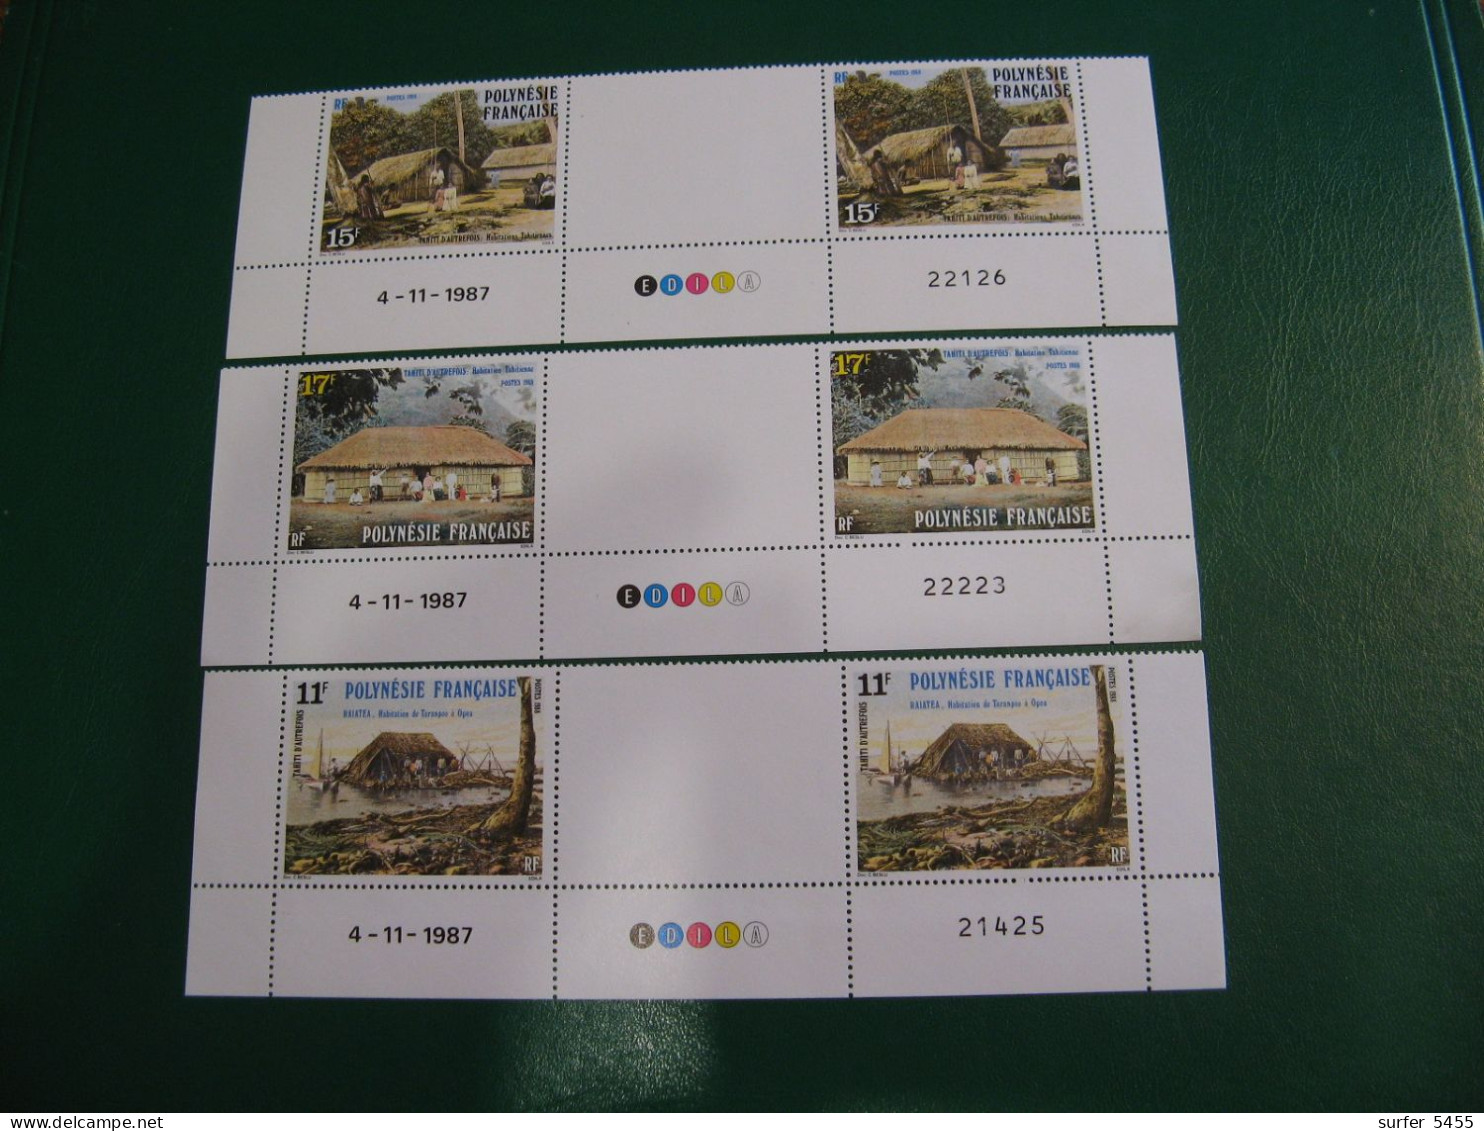 P0LYNESIE YVERT PO ORDINAIRE N° 299A /301A CD TIMBRES NEUFS ** LUXE -MNH- SERIE COMPLETE- COTE 4,50 EUROS - Unused Stamps